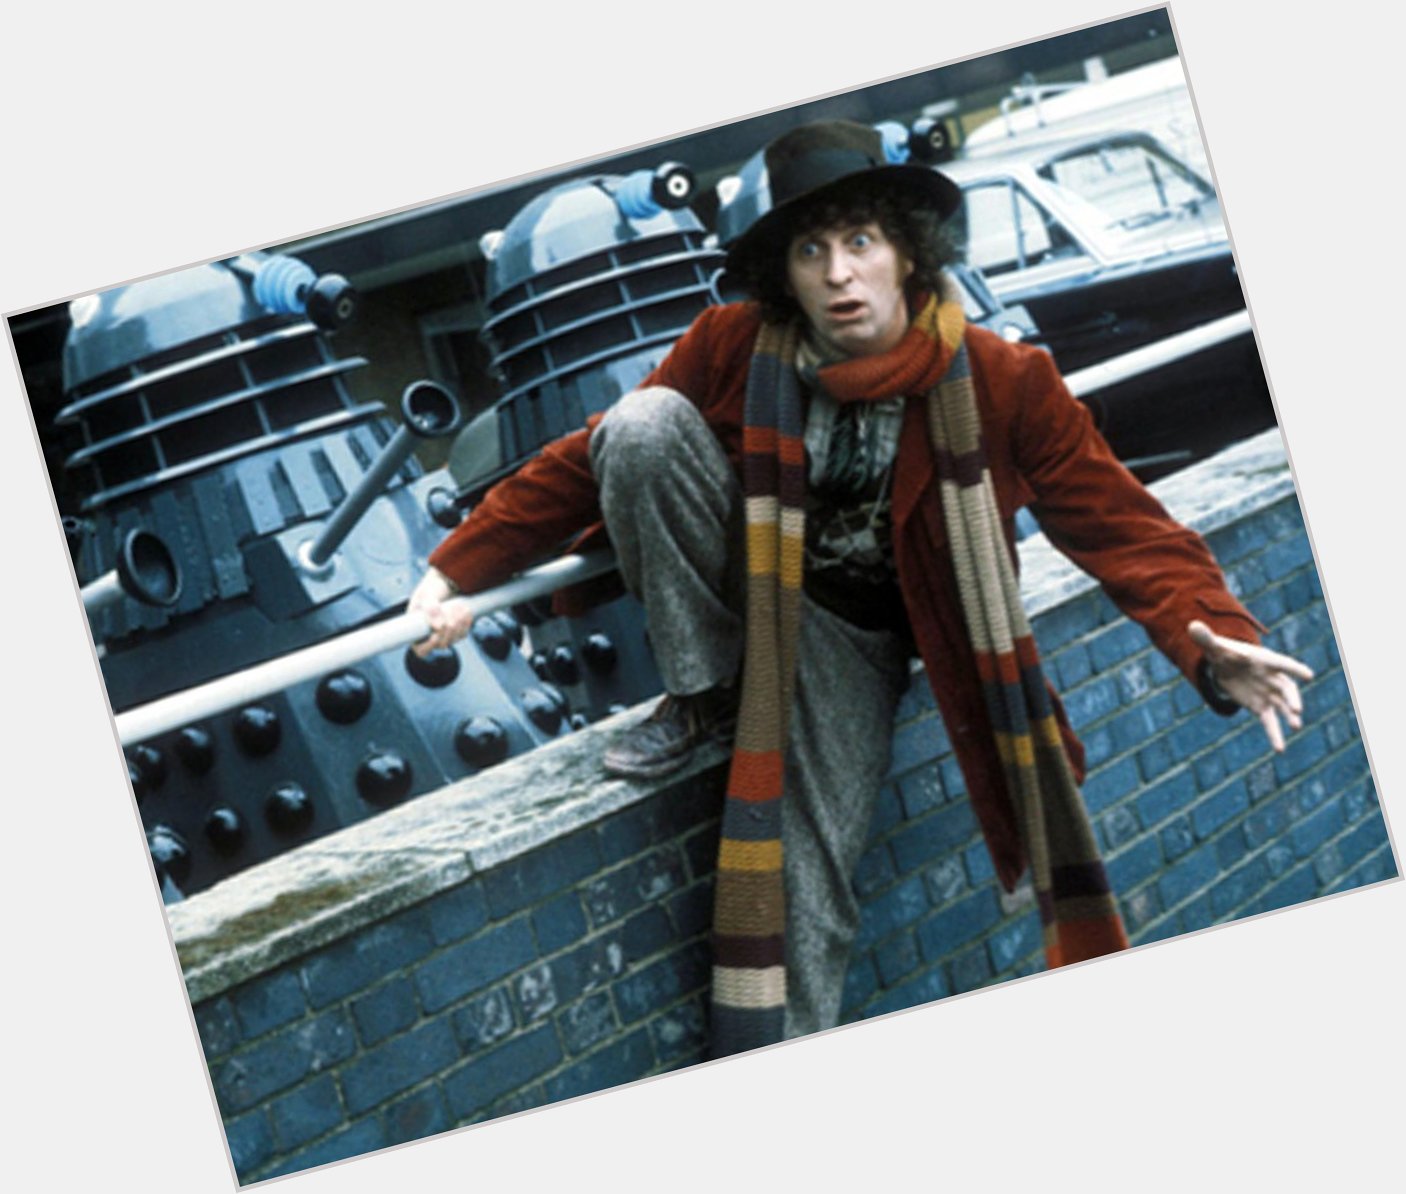 Today in Geek History: Grab some Jelly Babies! The 4th Doctor is celebrating turning 81. Happy birthday, Tom Baker! 